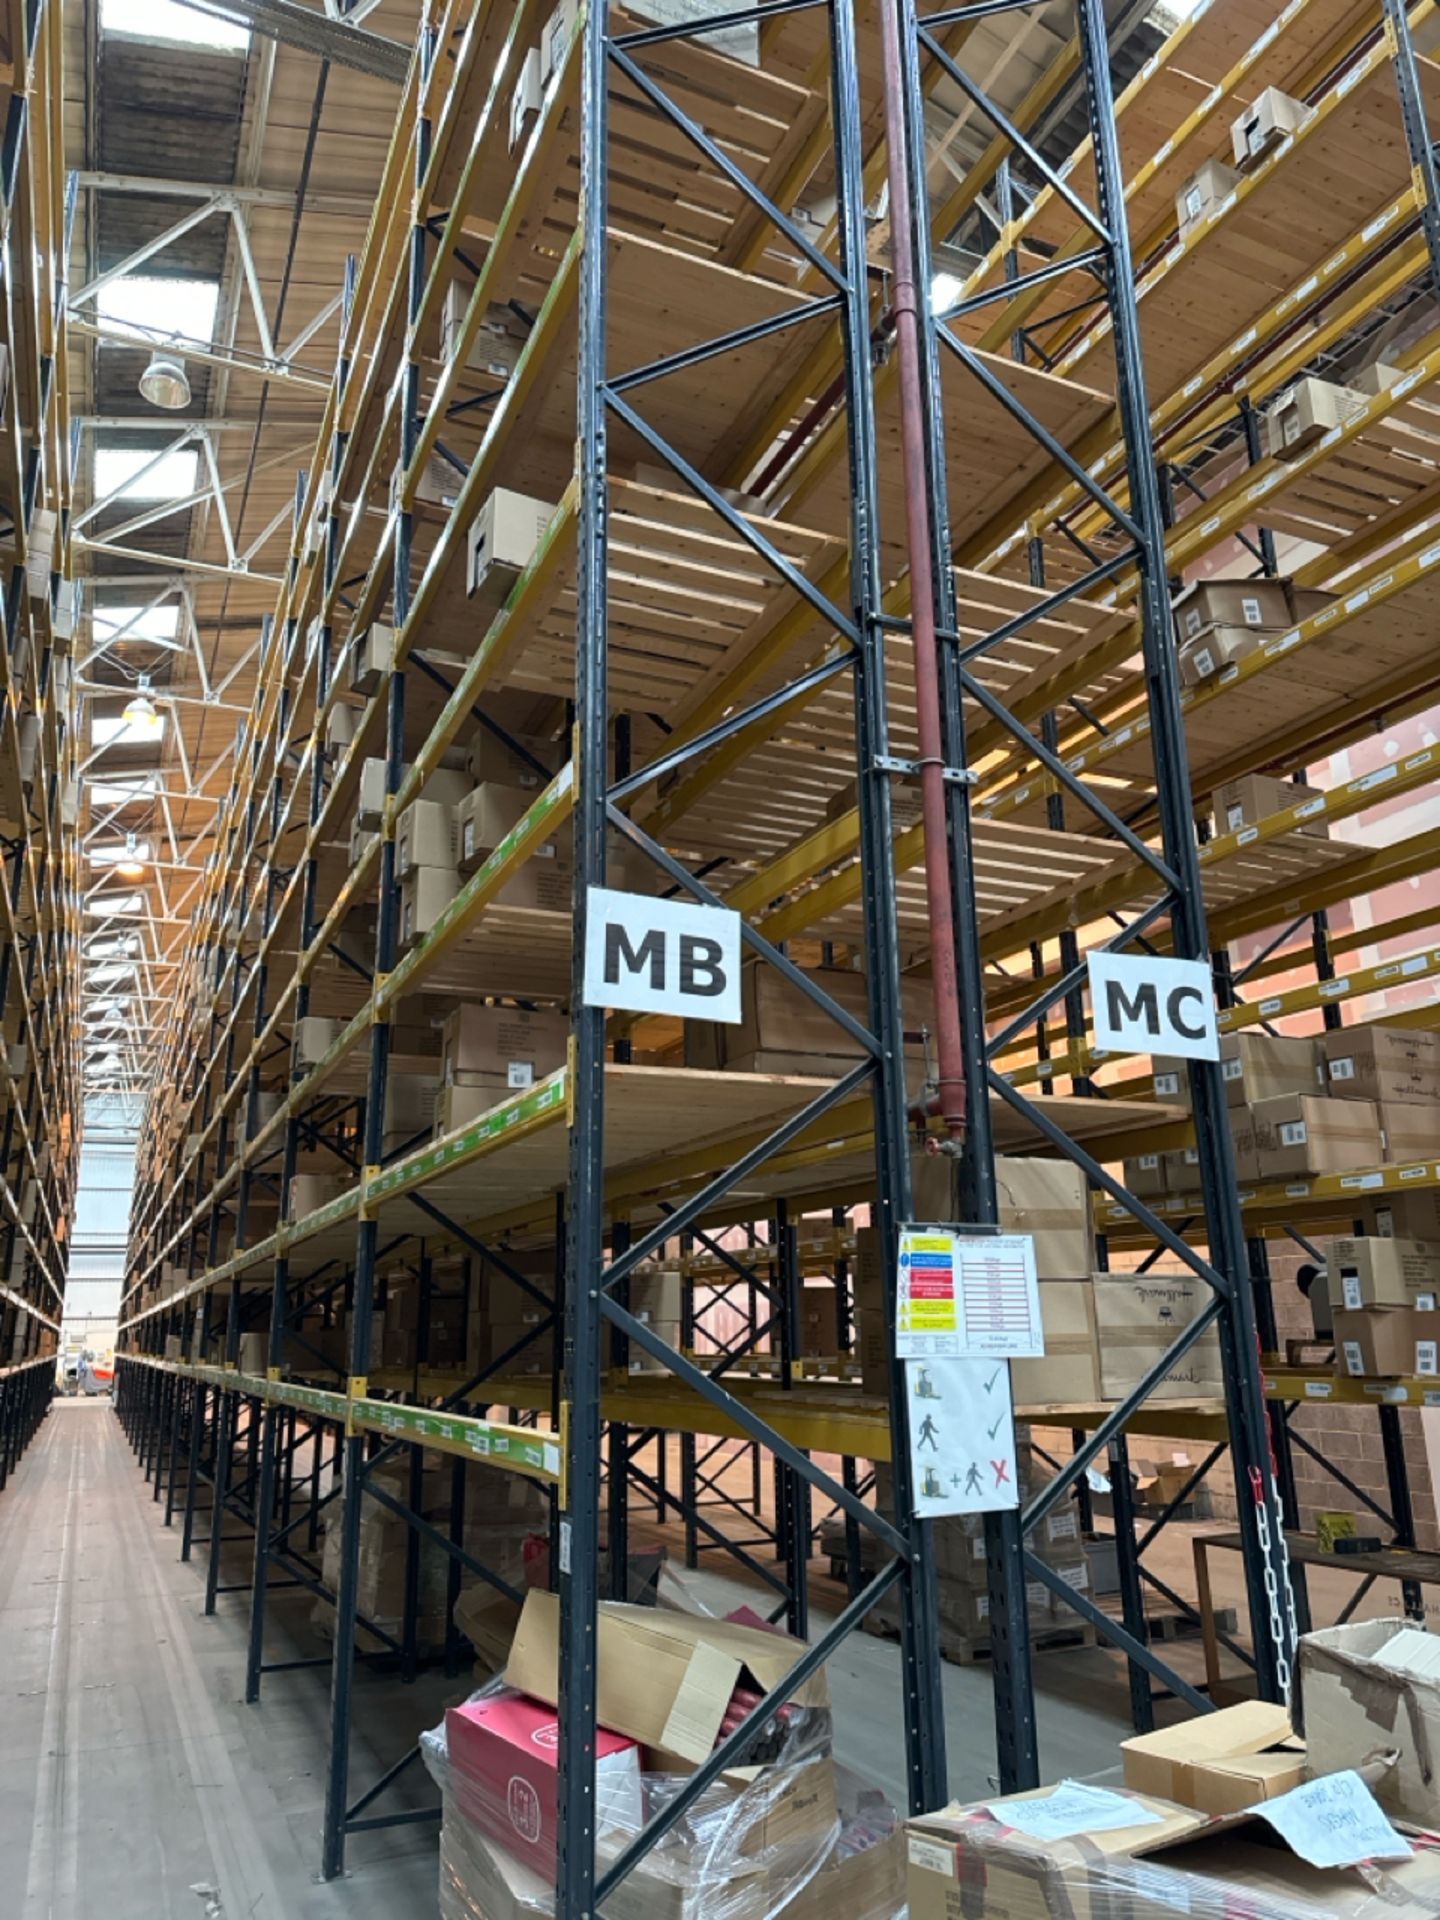 Run Of 36 Bays Of Back To Back Boltless Industrial Pallet Racking - Image 11 of 11